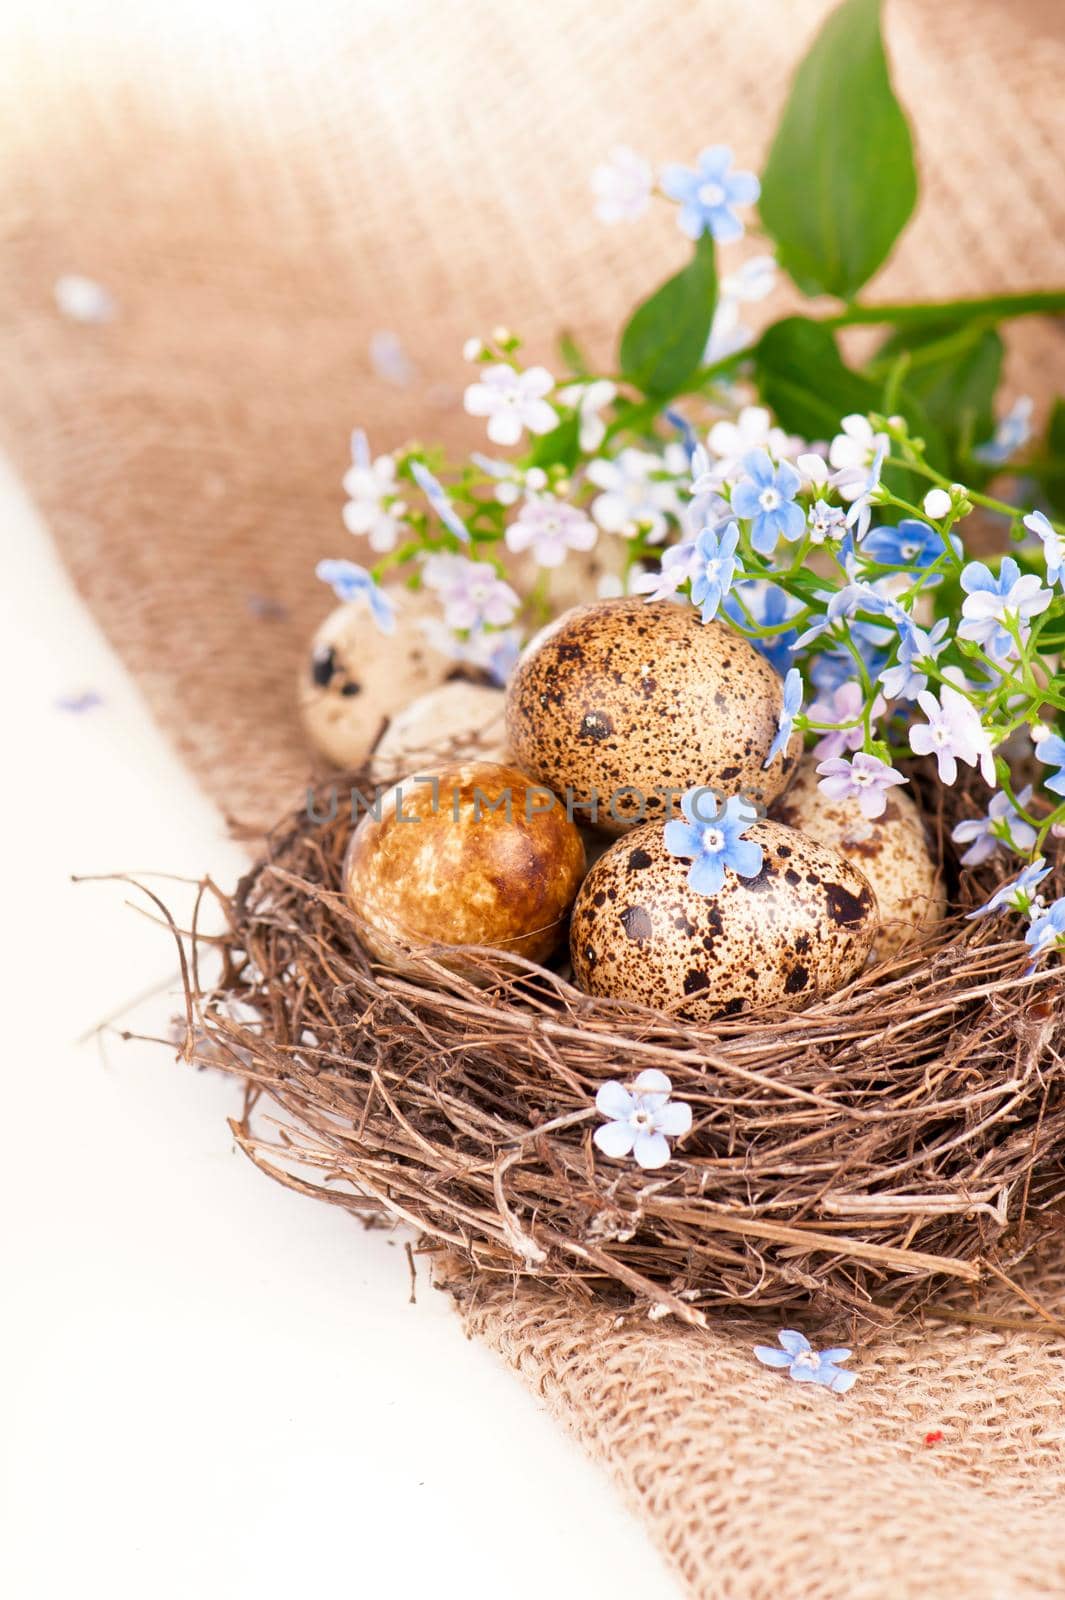 Quail eggs in a nest, forget-me-nots on a canvas